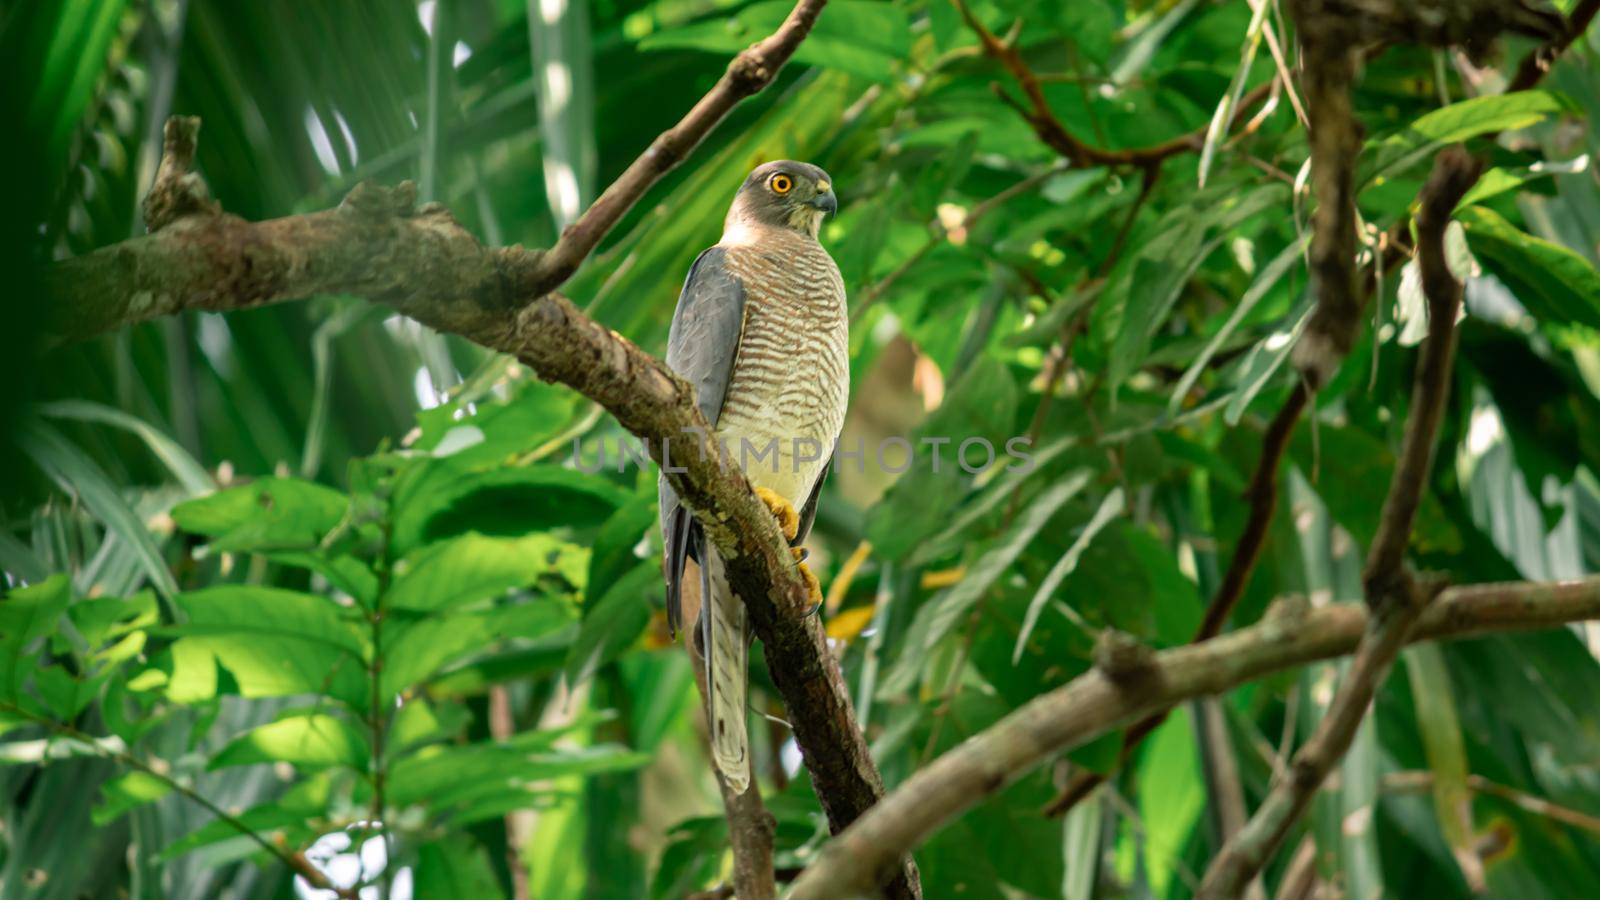 The Shikra is a small predatorial bird, perched and resting under the shade of the forest.